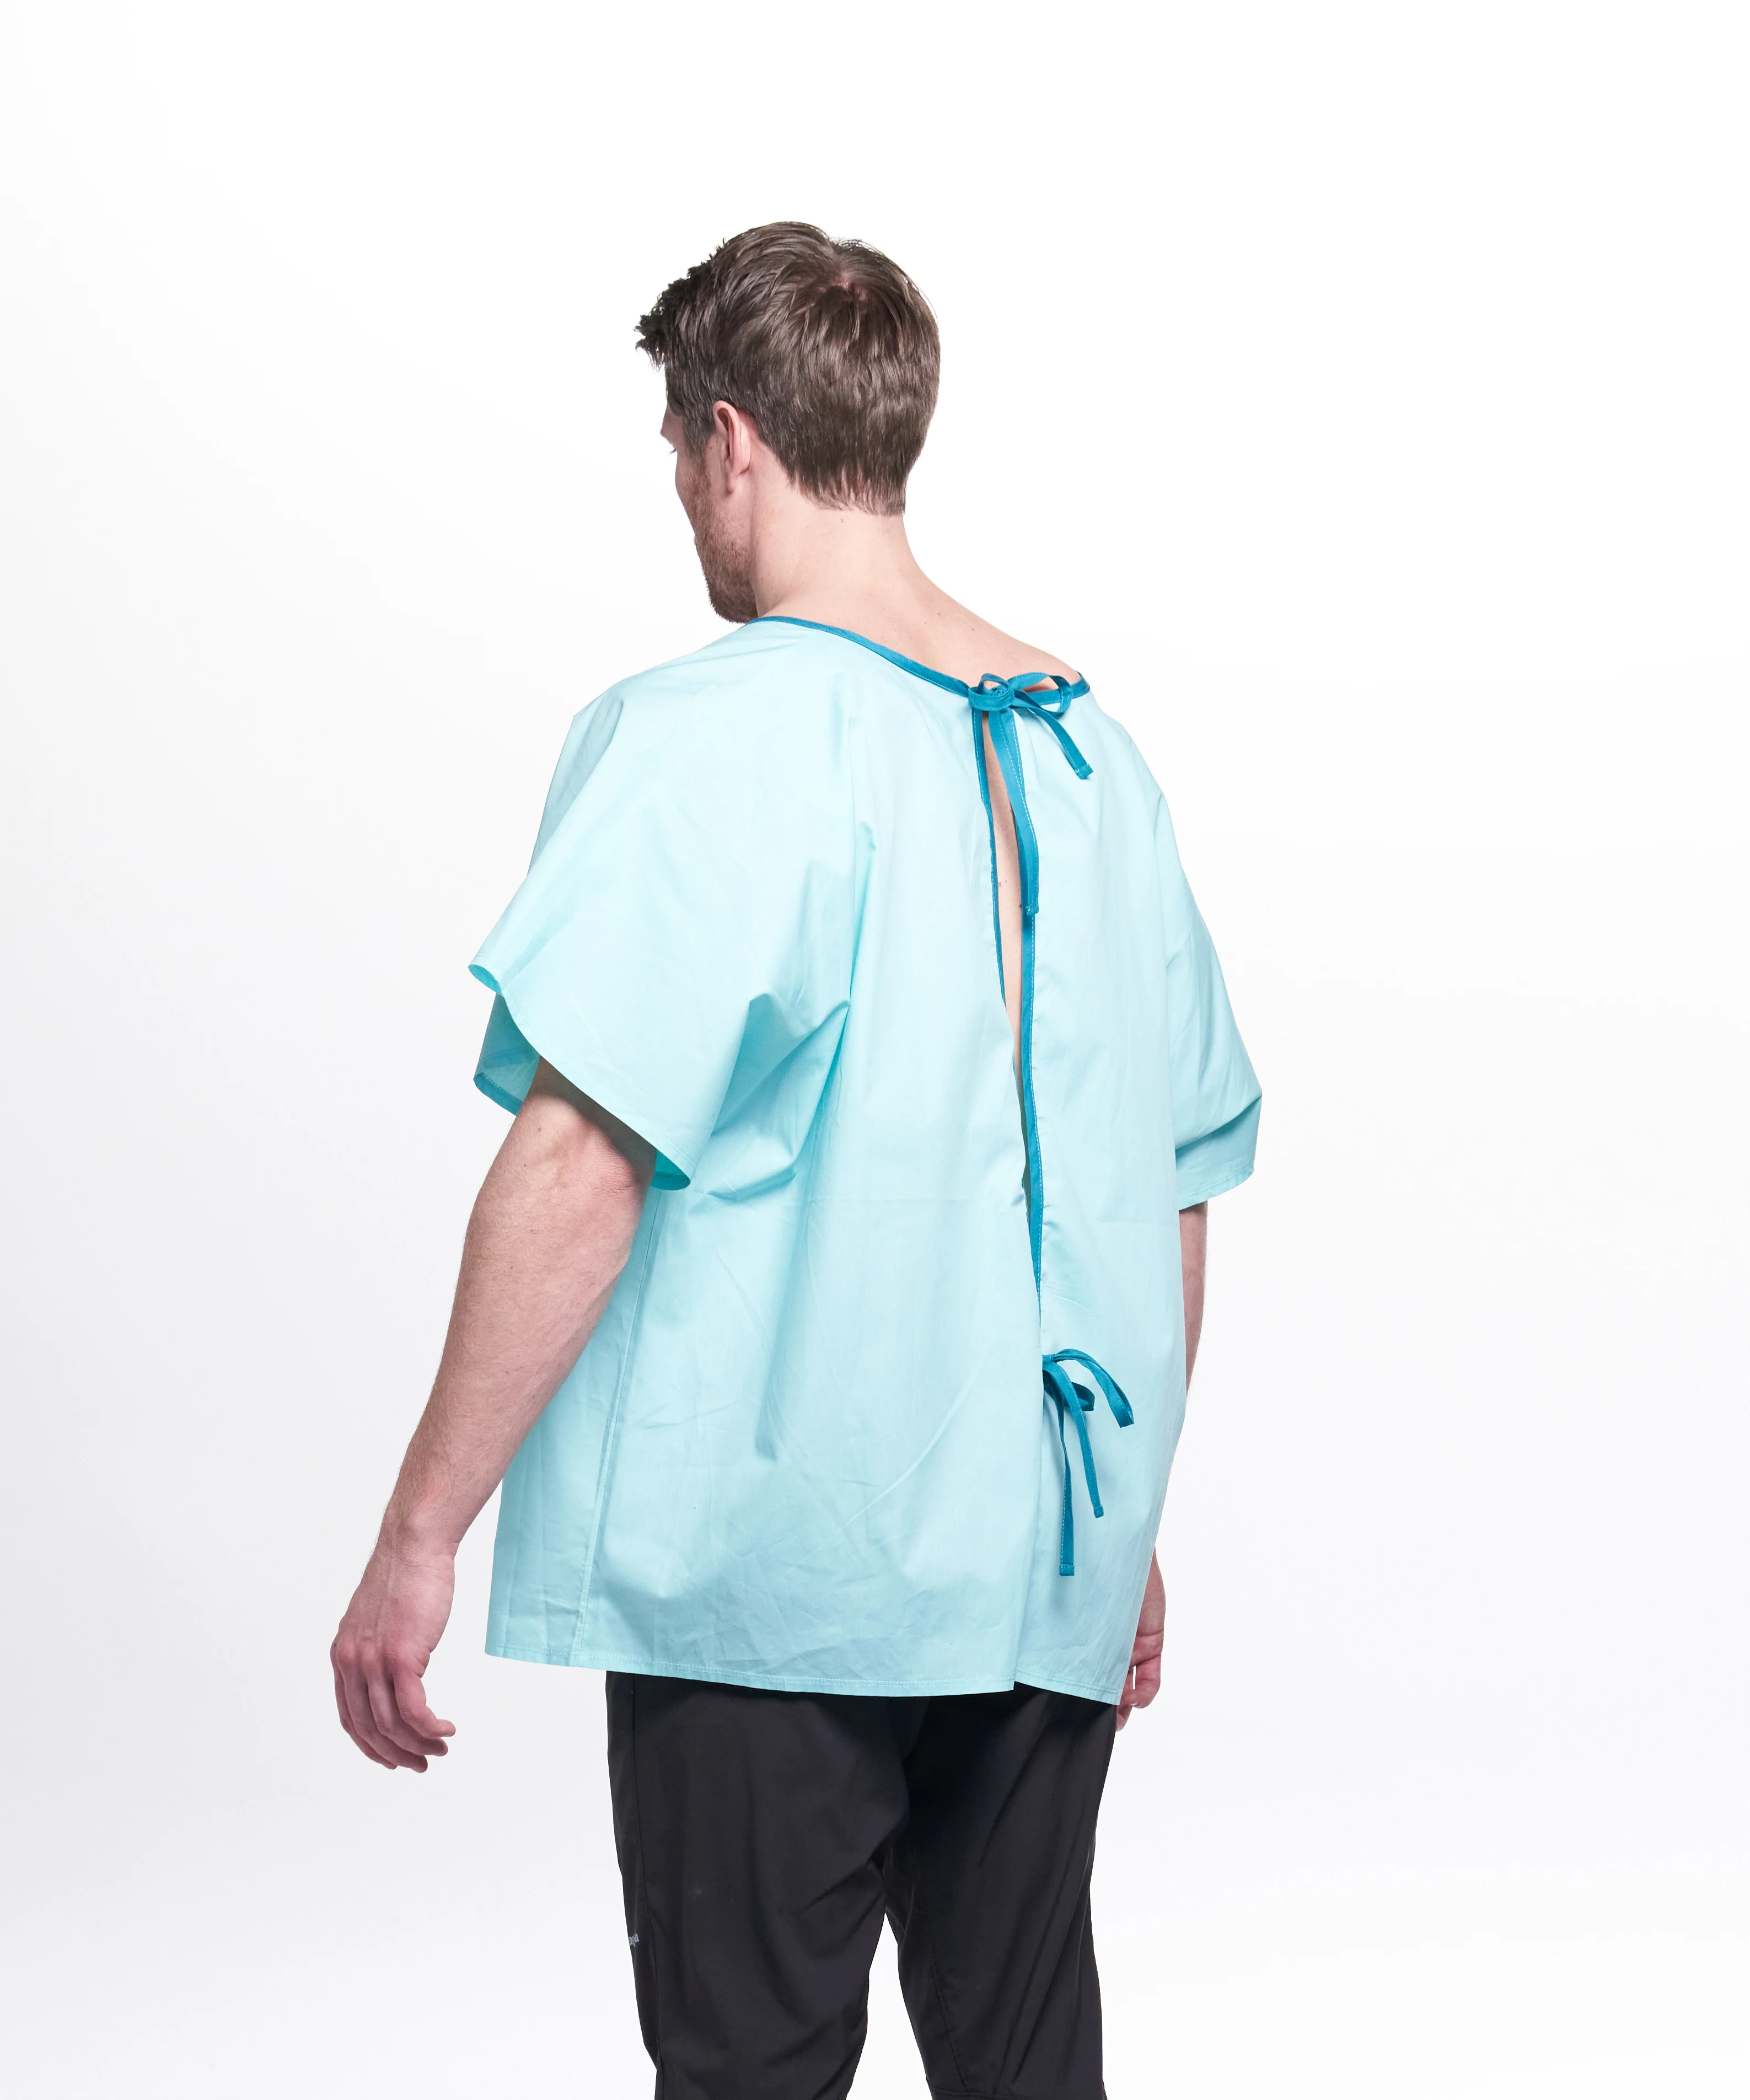 AromaTouch Reusable Gown - Teal